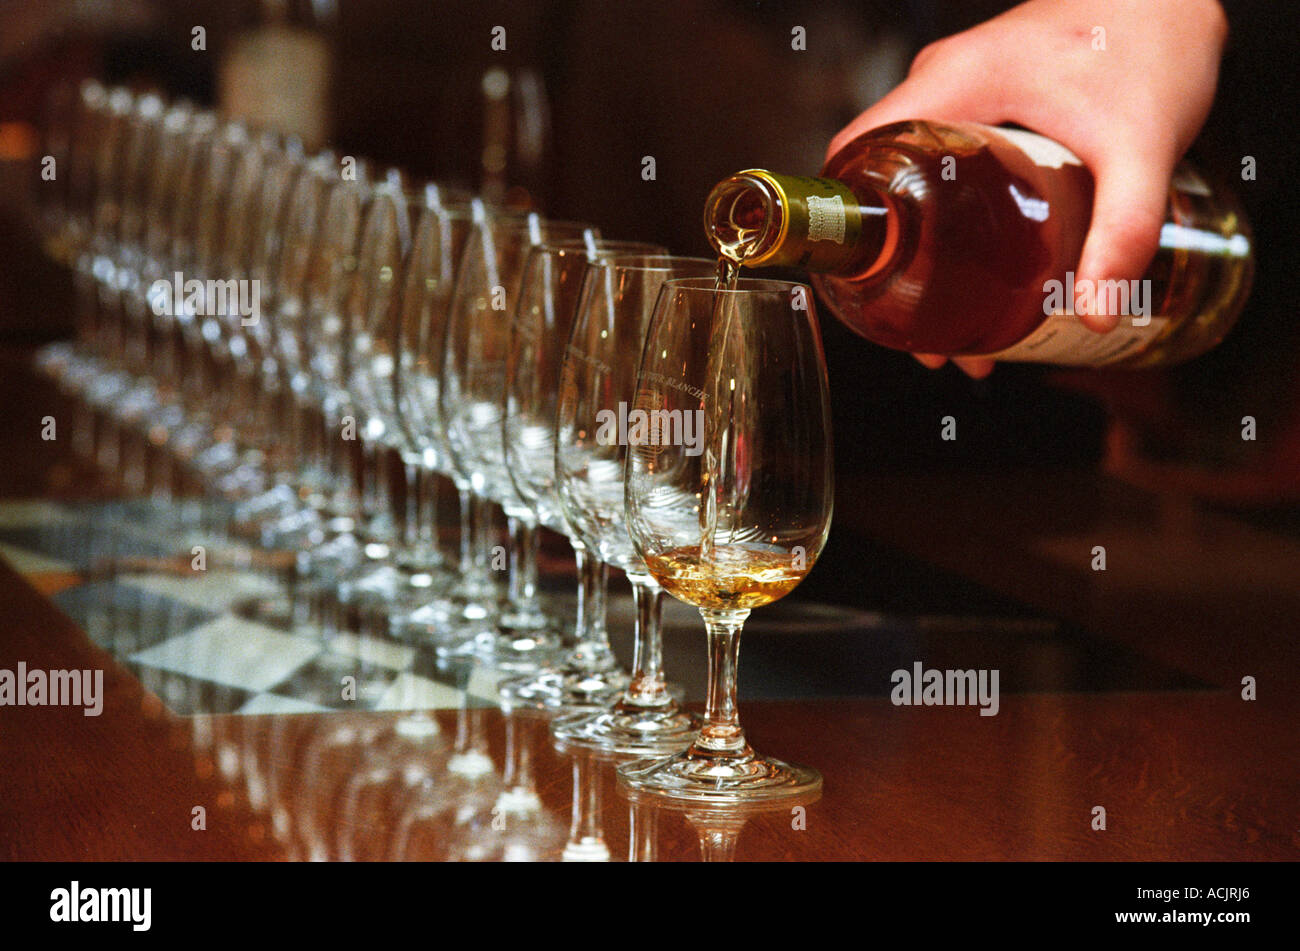 A long row of wine tasting glasses being filled with sauternes wine on a wooden table with a hand holding the bottle and pouring   at harvest time,  Chateau La Tour Blanche, Sauternes, Bordeaux, Aquitaine, Gironde, France, Europe Stock Photo